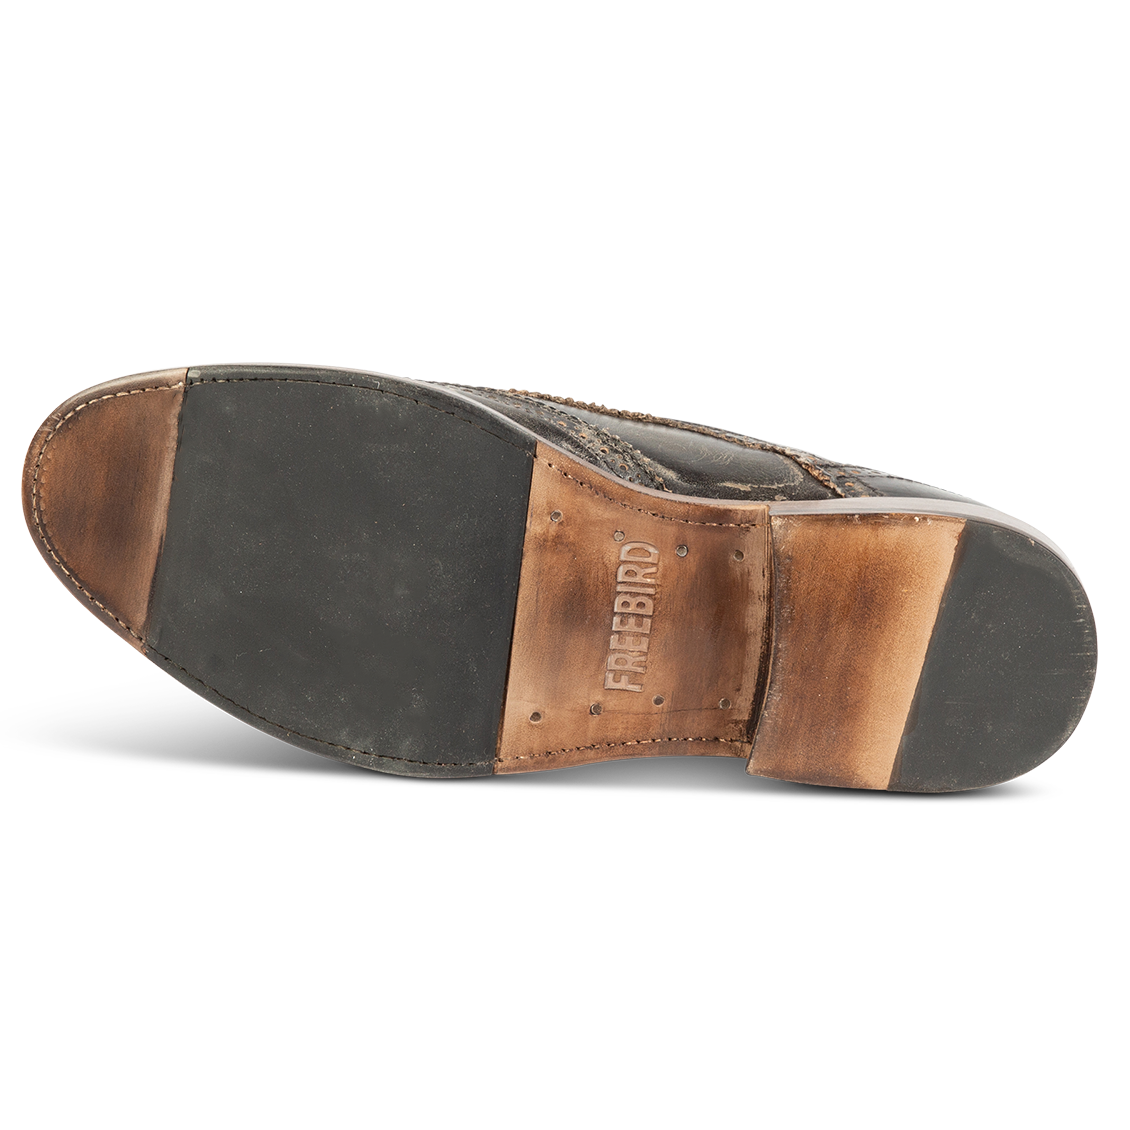 Leather sole imprinted with FREEBIRD on men's Kensington olive shoe